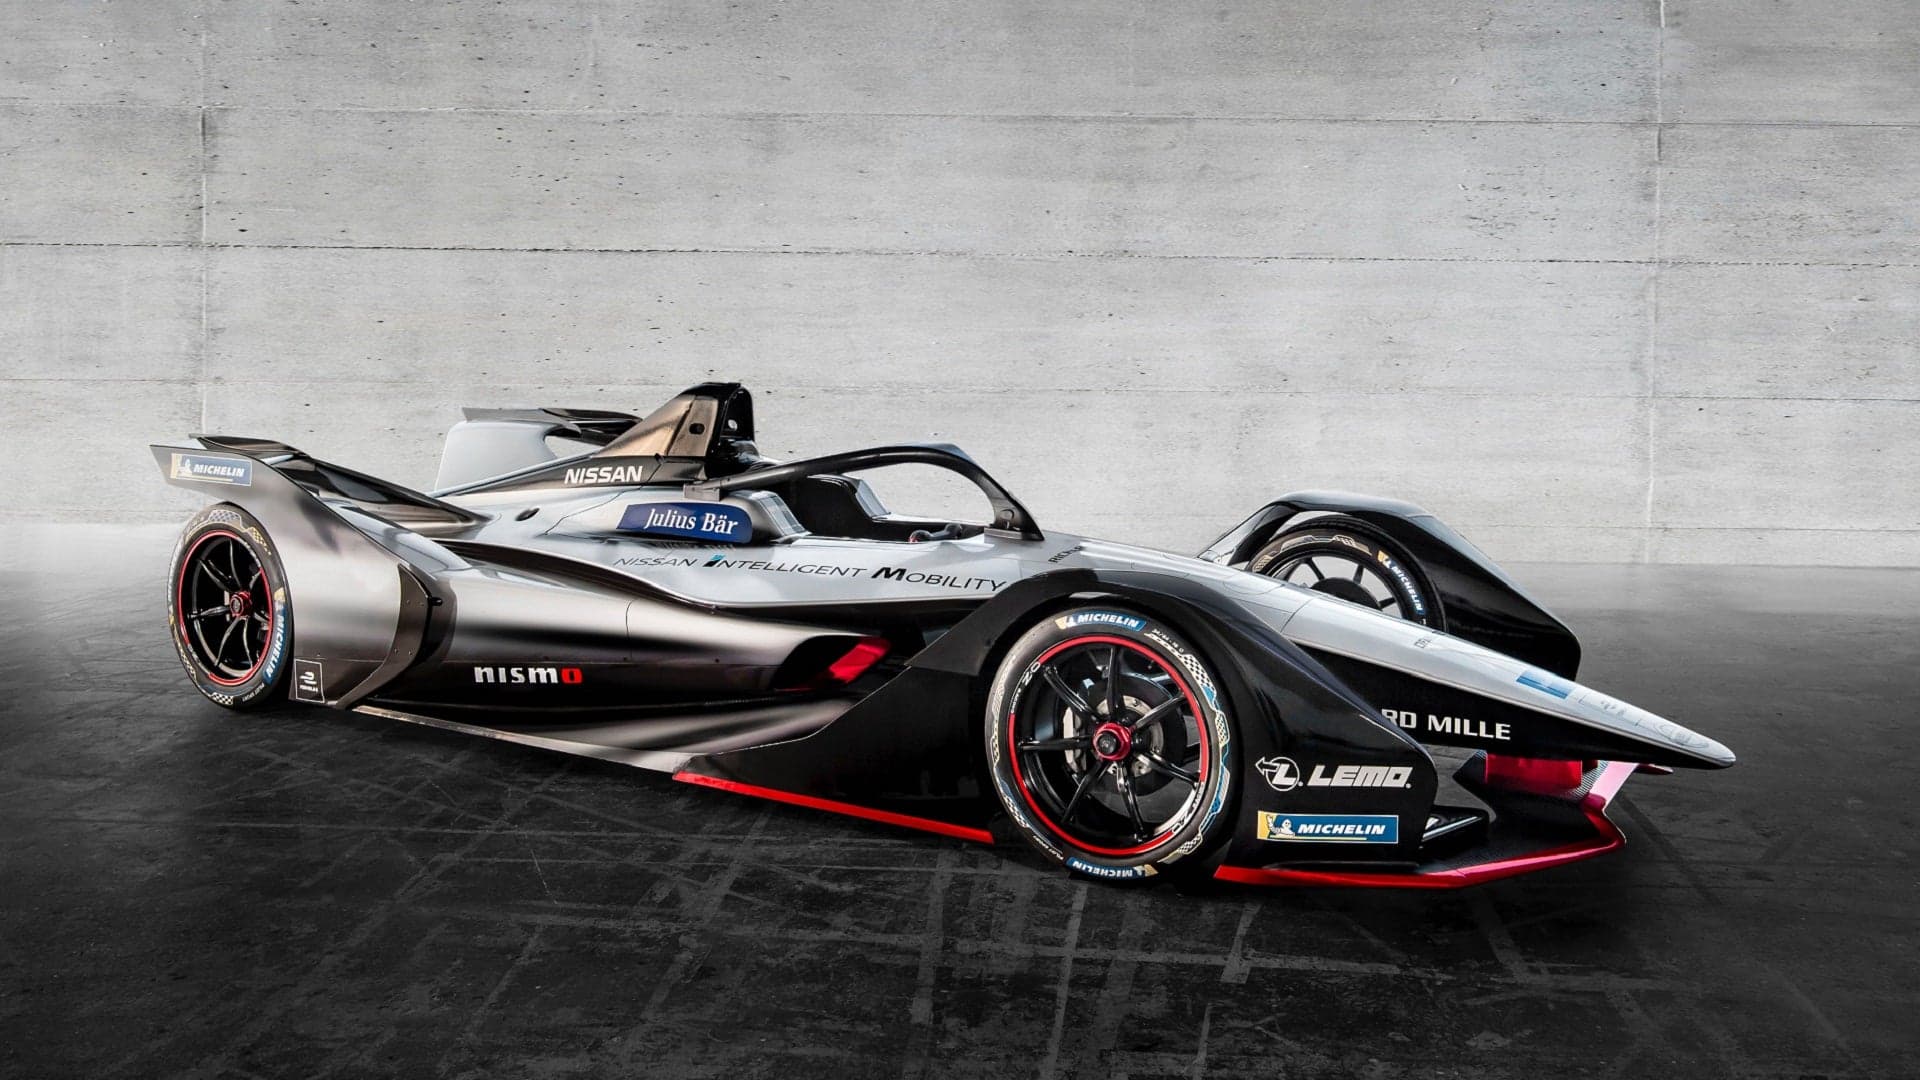 Nissan’s New Formula E Racer Is the Sexiest Nissan Ever Created